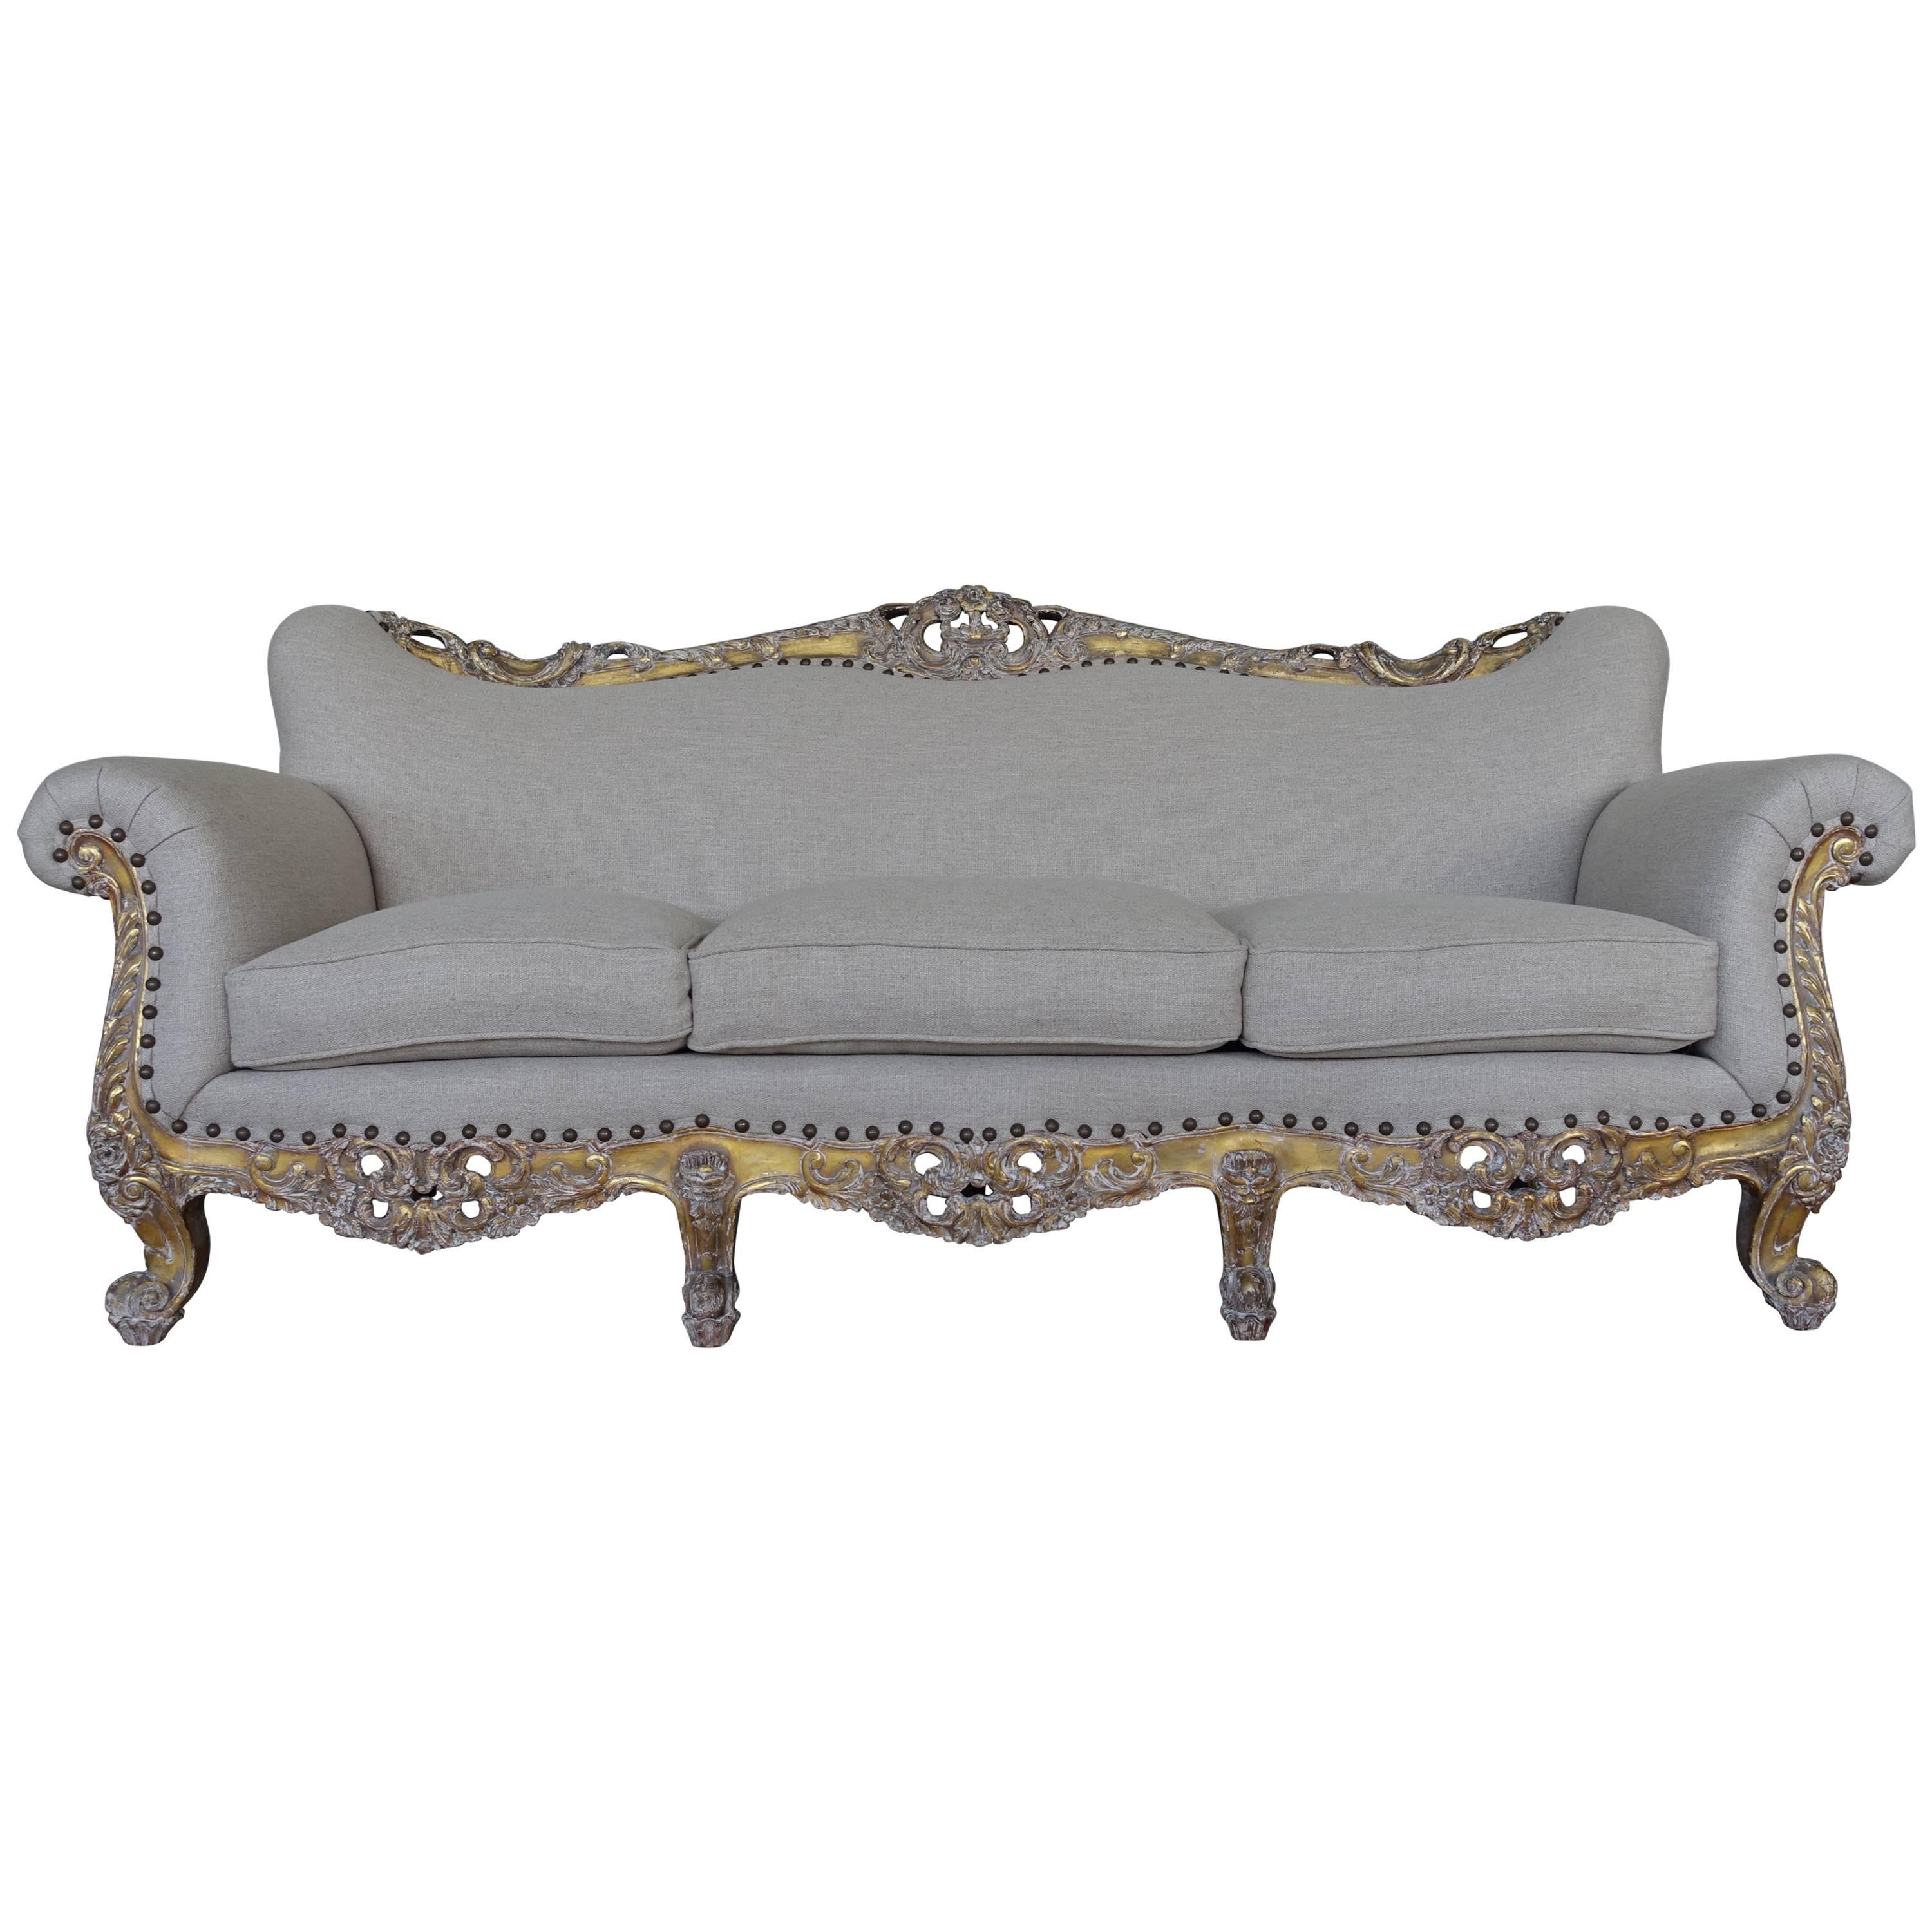 19th Century French Carved Giltwood Sofa